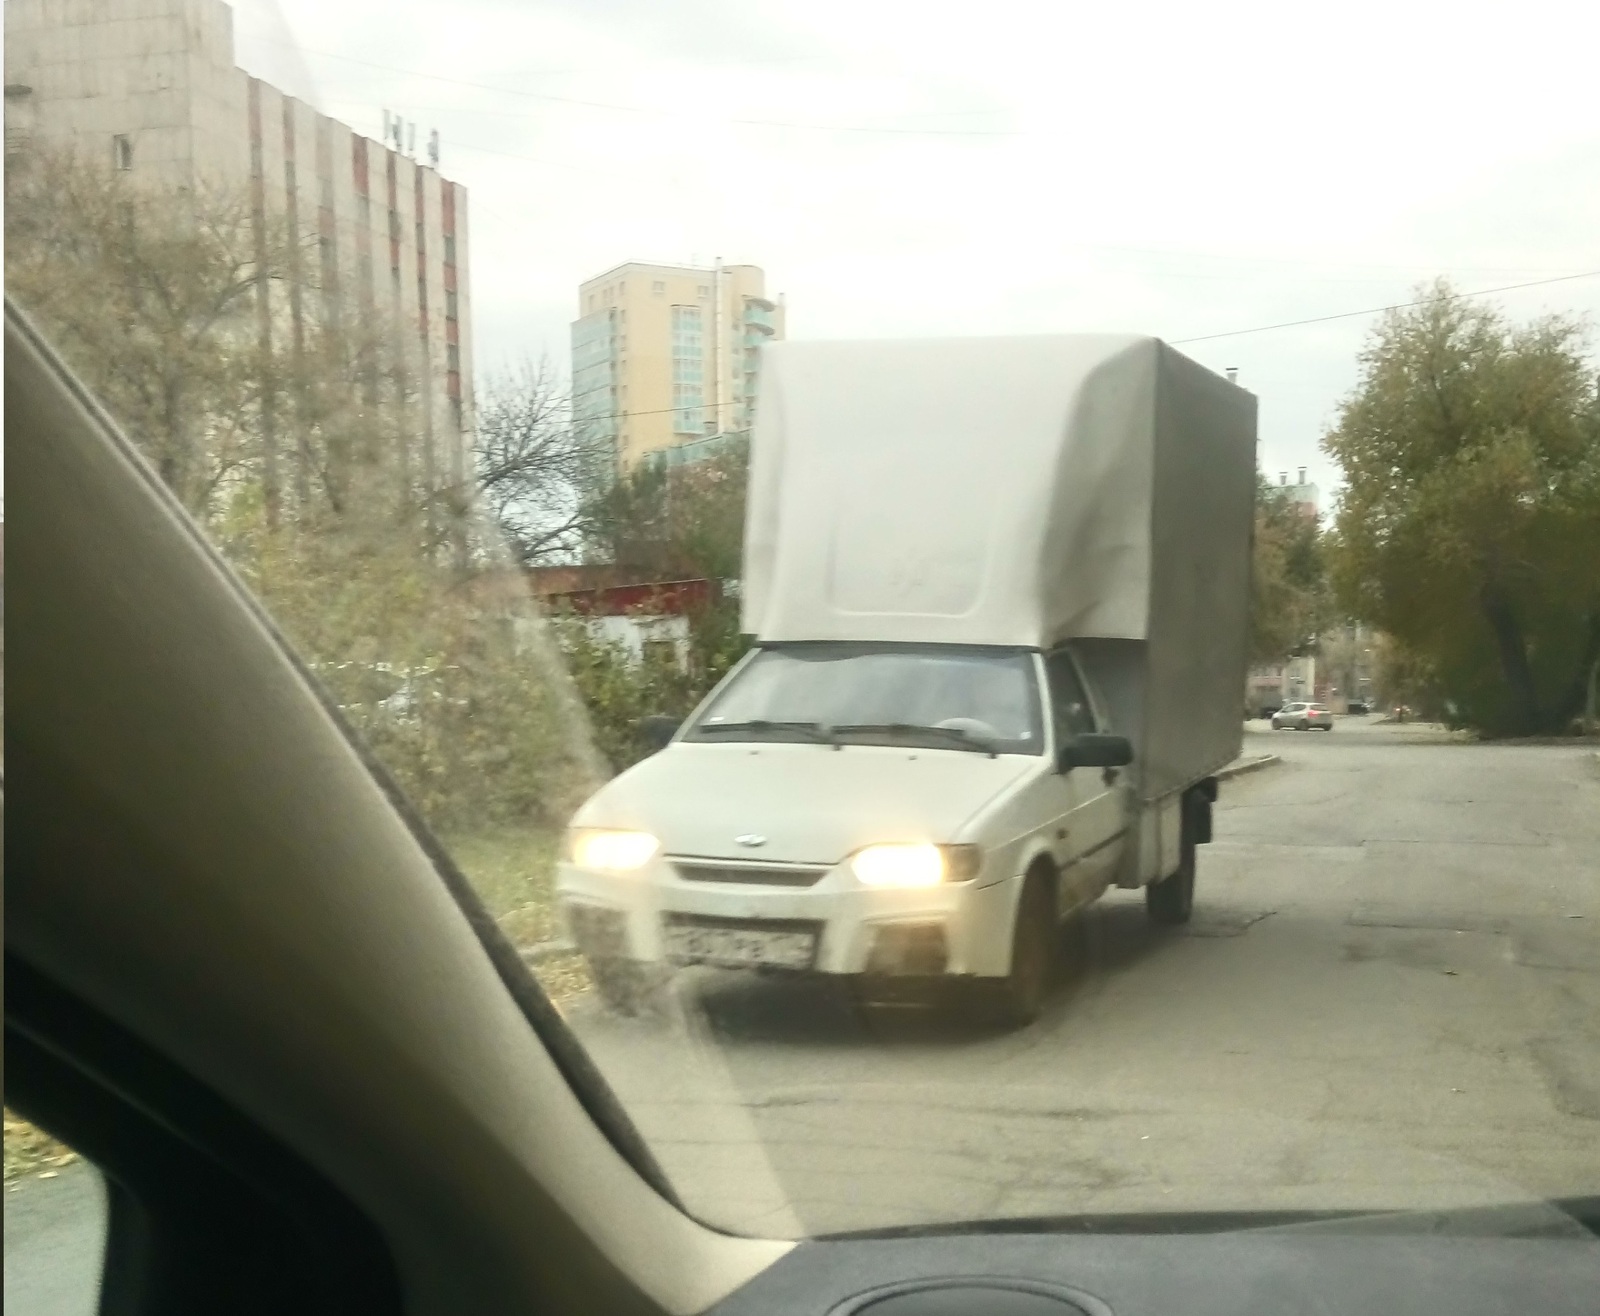 And in our yard, there is one wheelbarrow!) - Humor, Samopal, Tuning, Lada, Auto